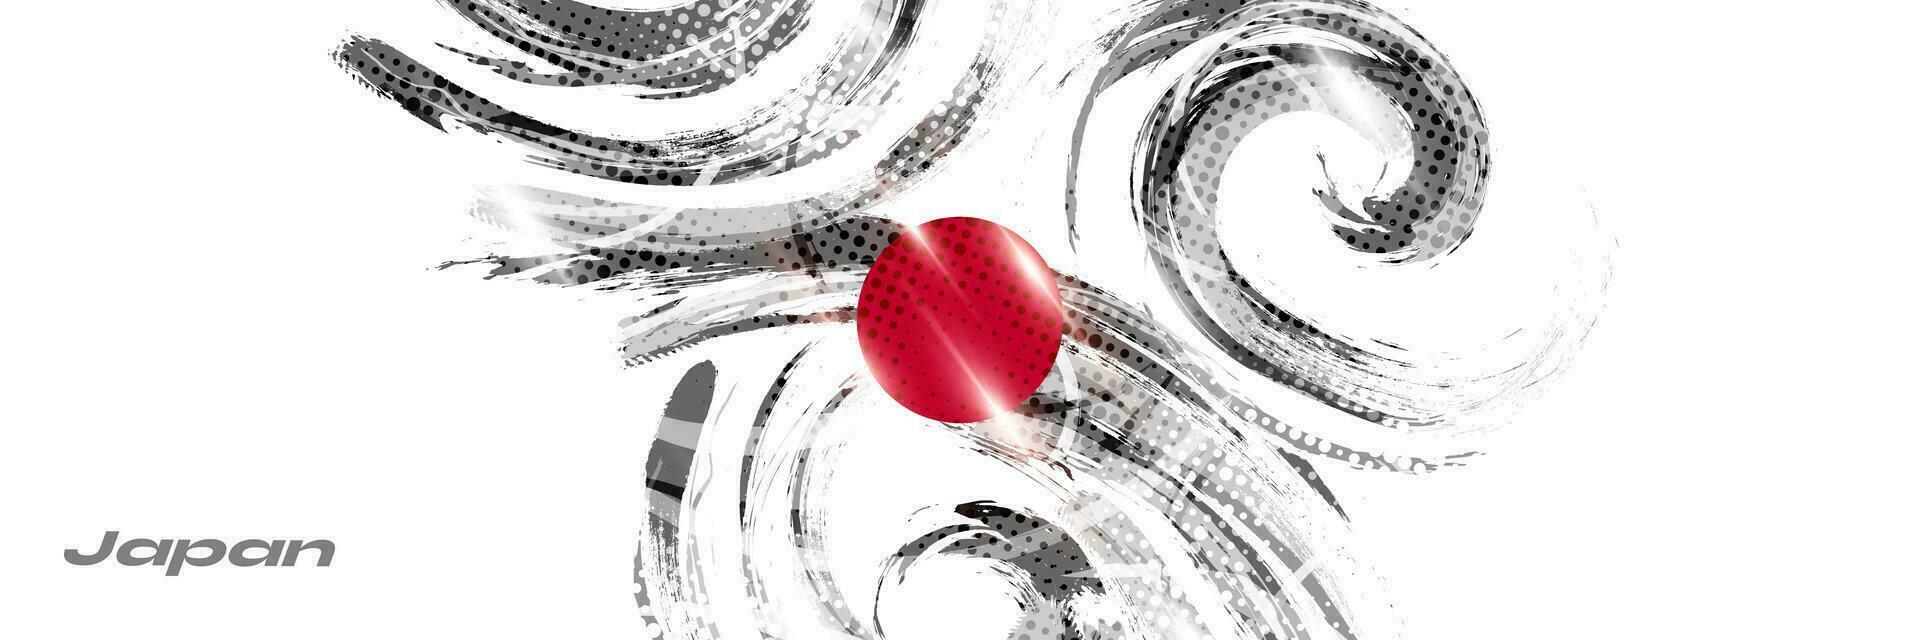 Japan Flag in Brush and Grunge Paint Style. Vector of Japanese Flag